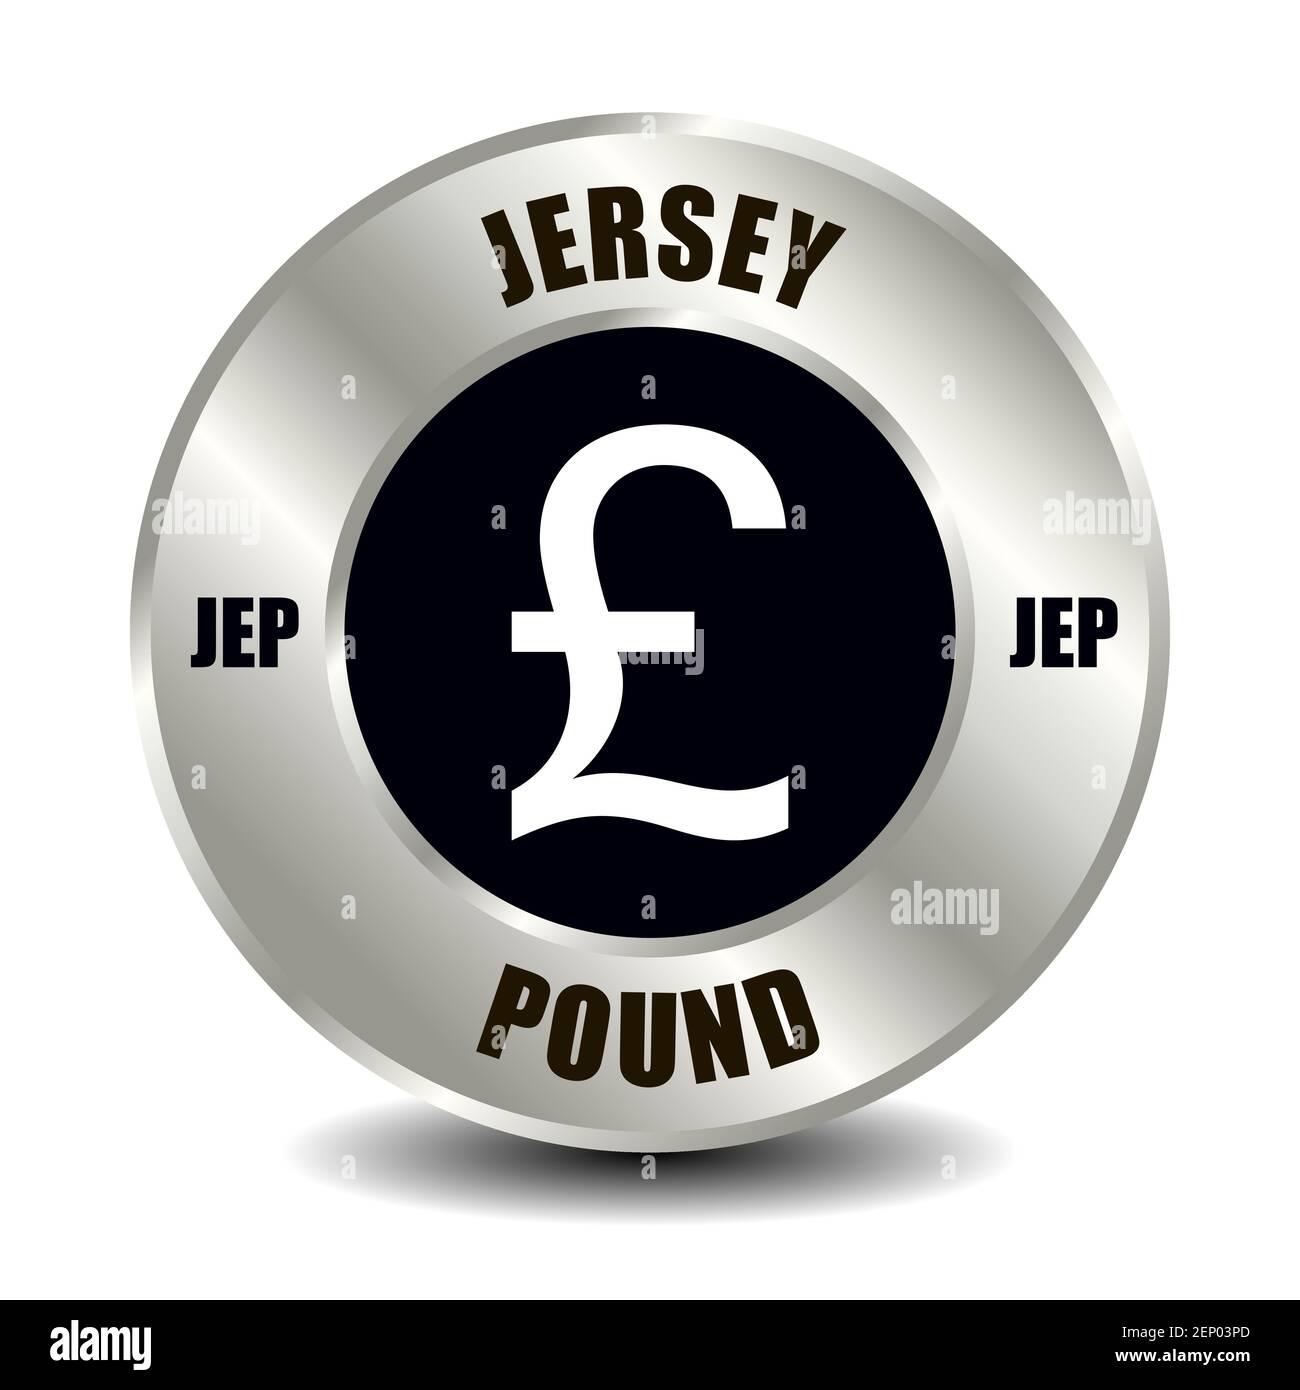 Jersey money icon isolated on round silver coin. Vector sign of currency symbol with international ISO code and abbreviation Stock Vector